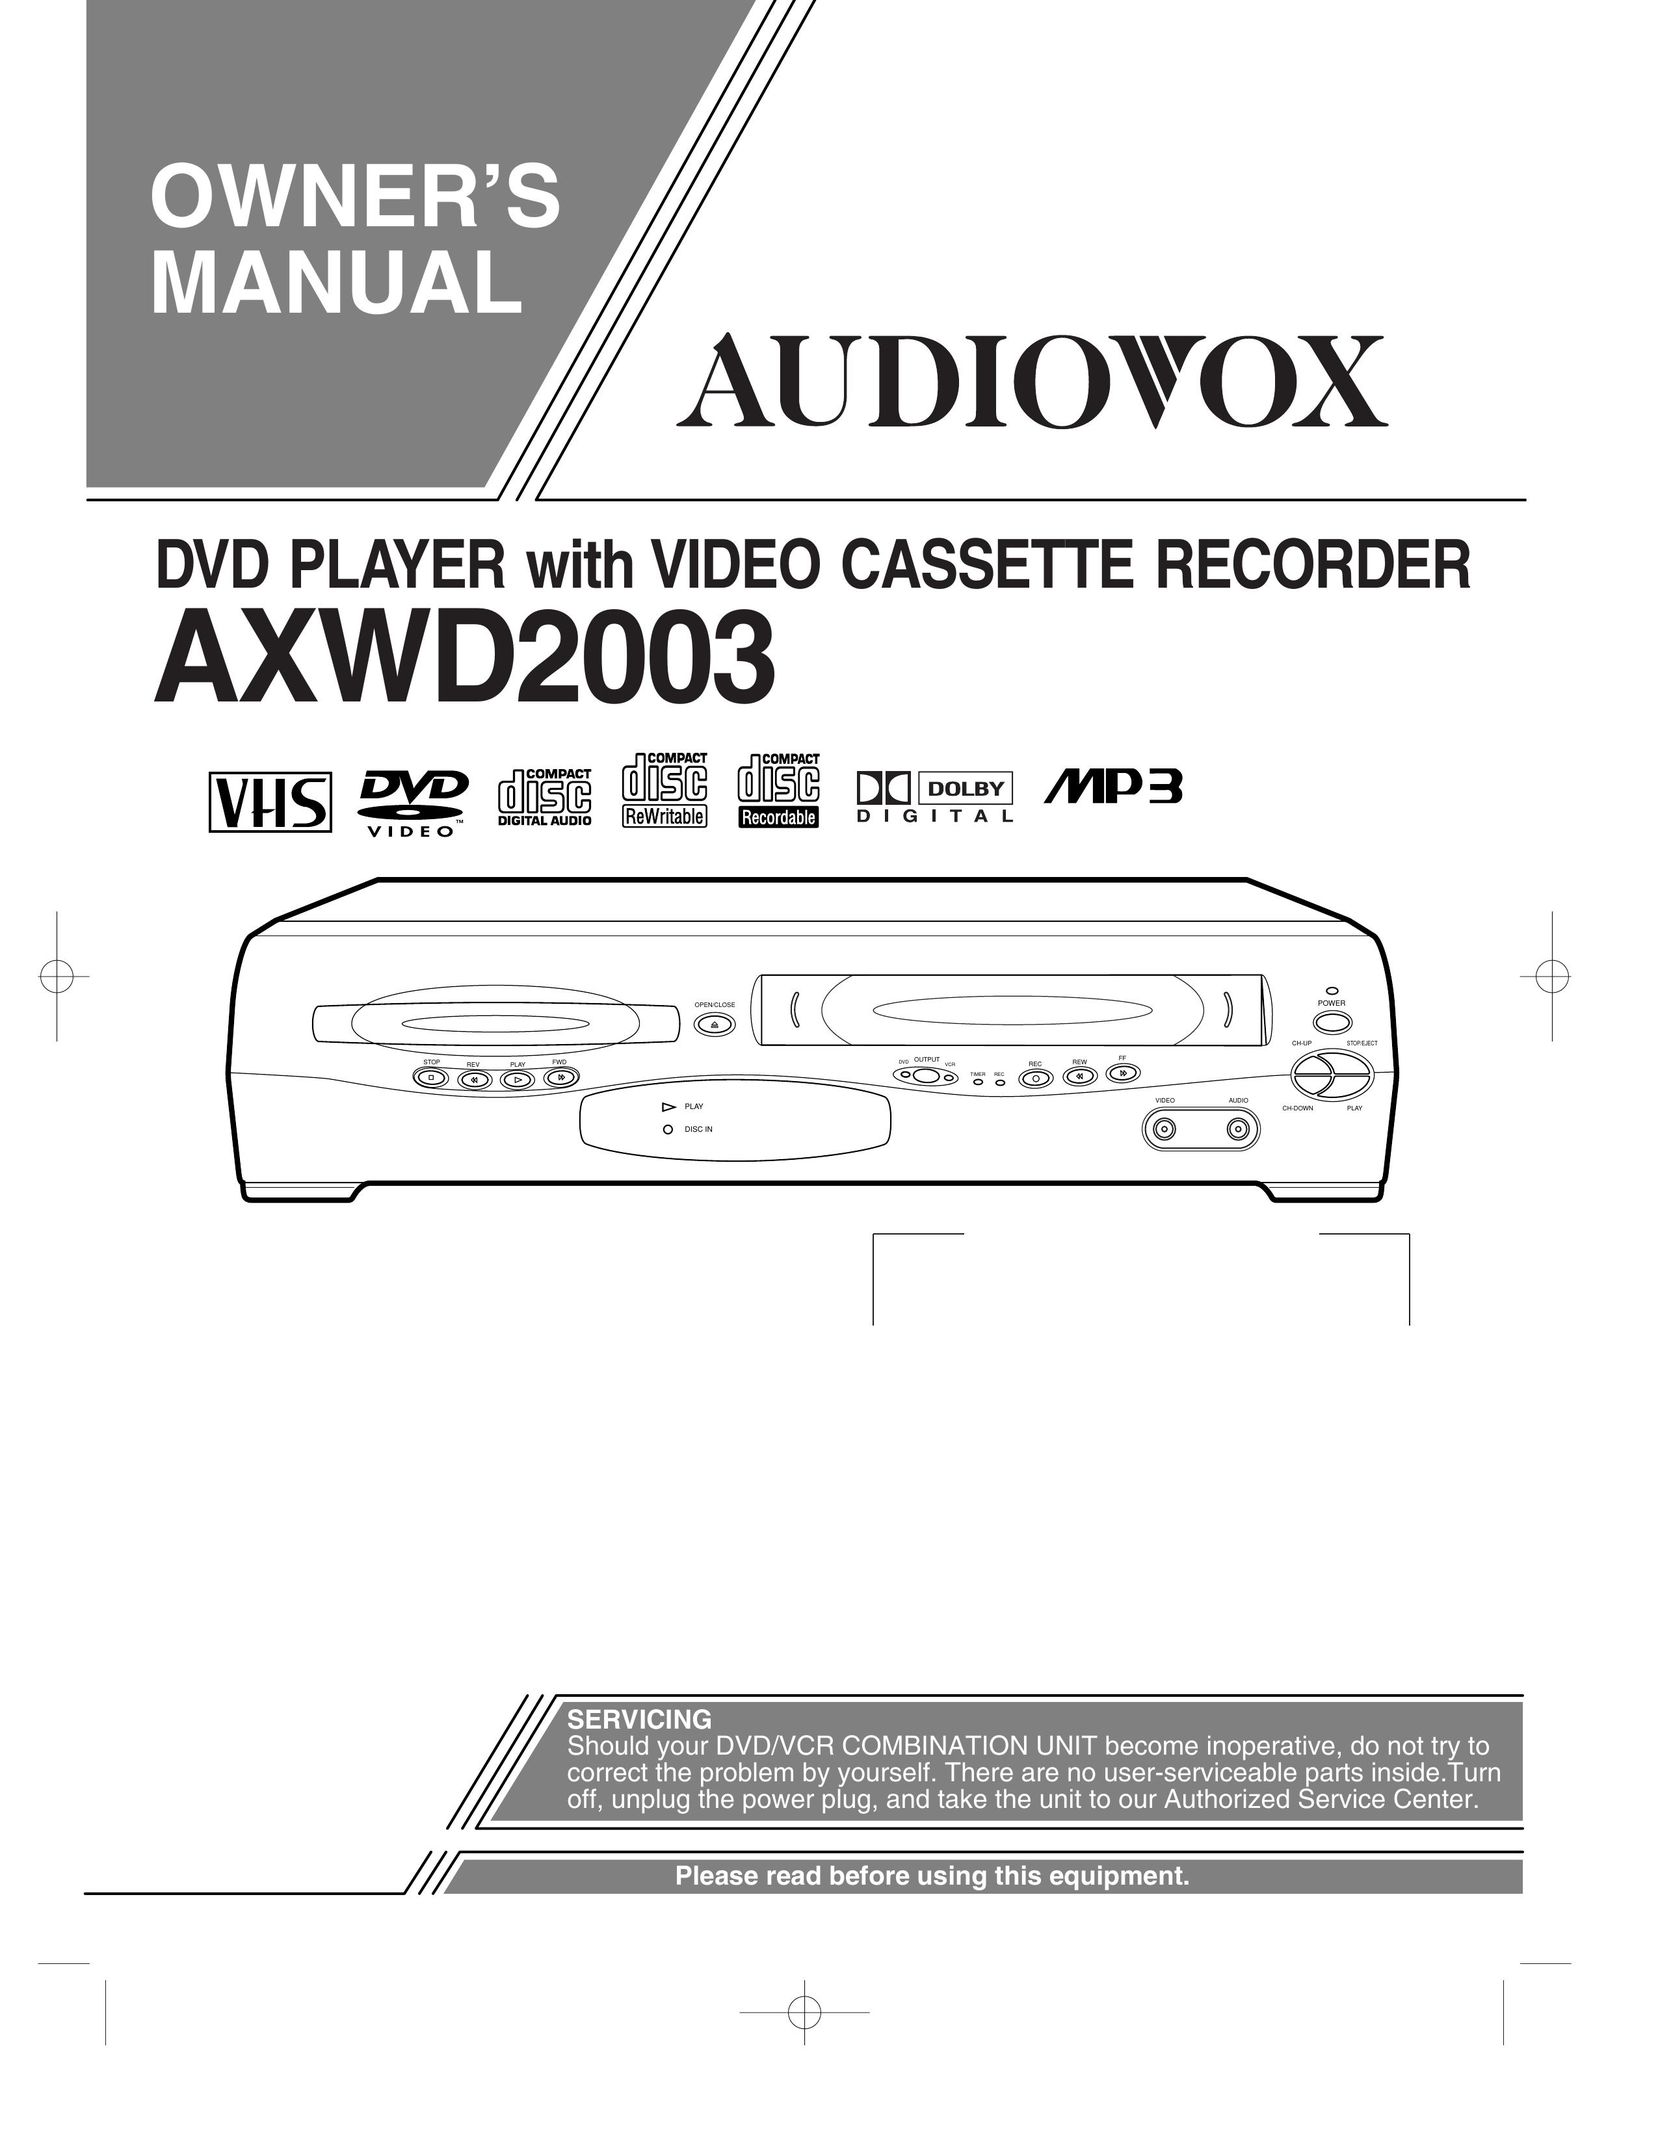 Audiovox AXWD2003 DVD VCR Combo User Manual